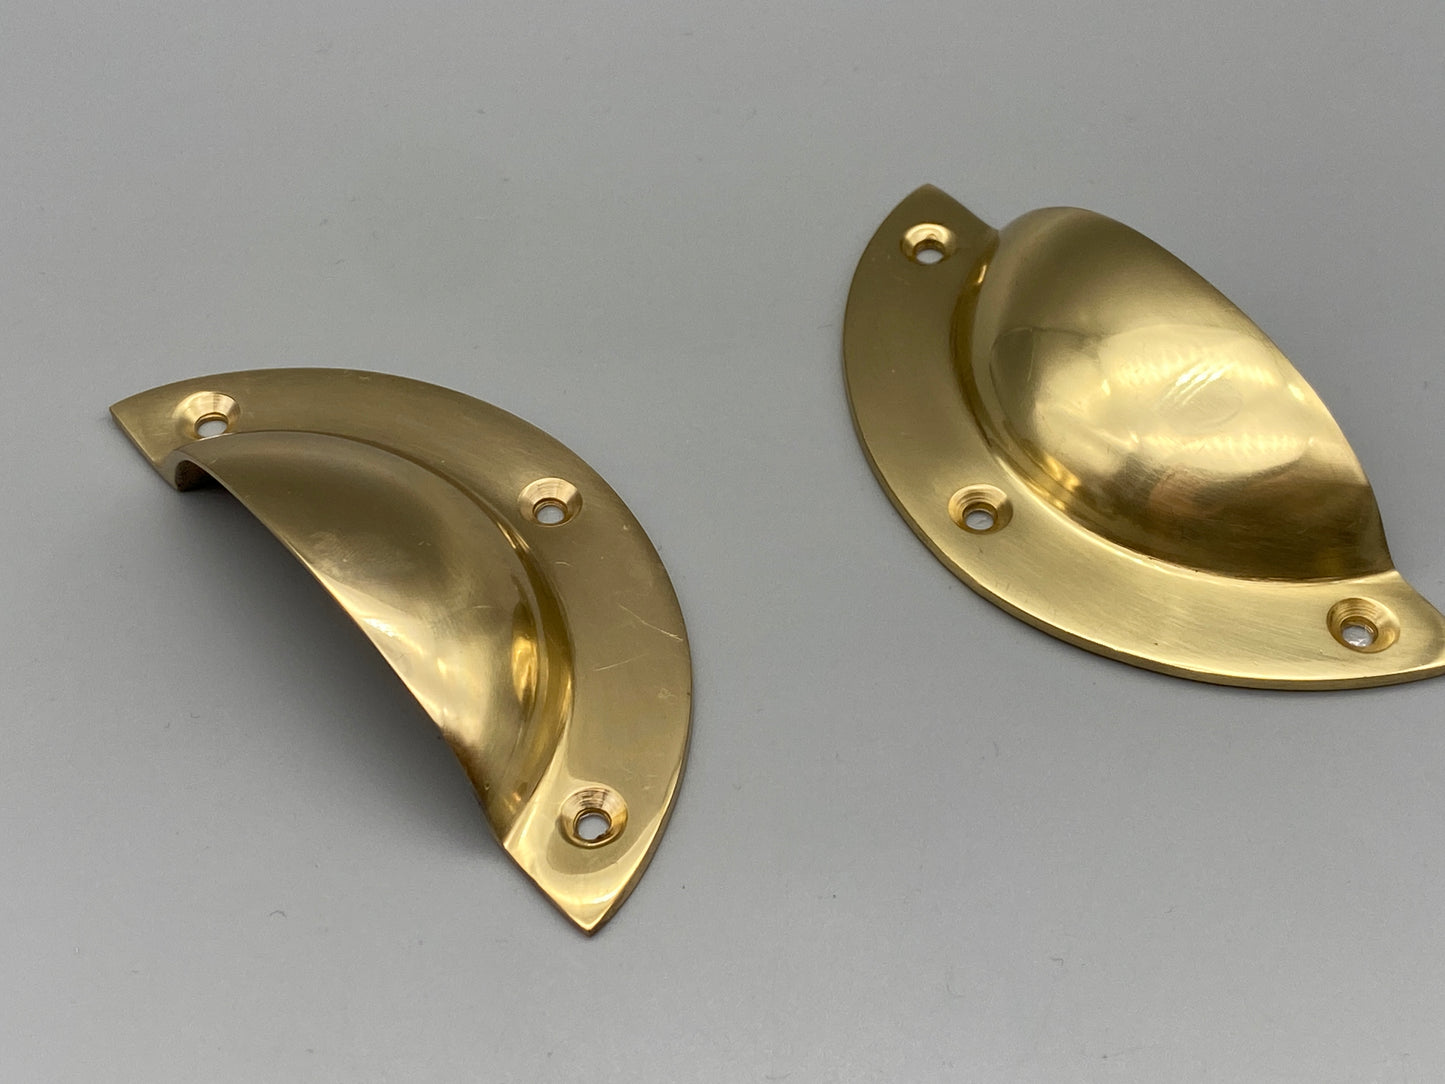 Solid Brass Shell Handles - Half Moon Drawer Pulls 64mm - Front Fix - Brass - Pack of 1